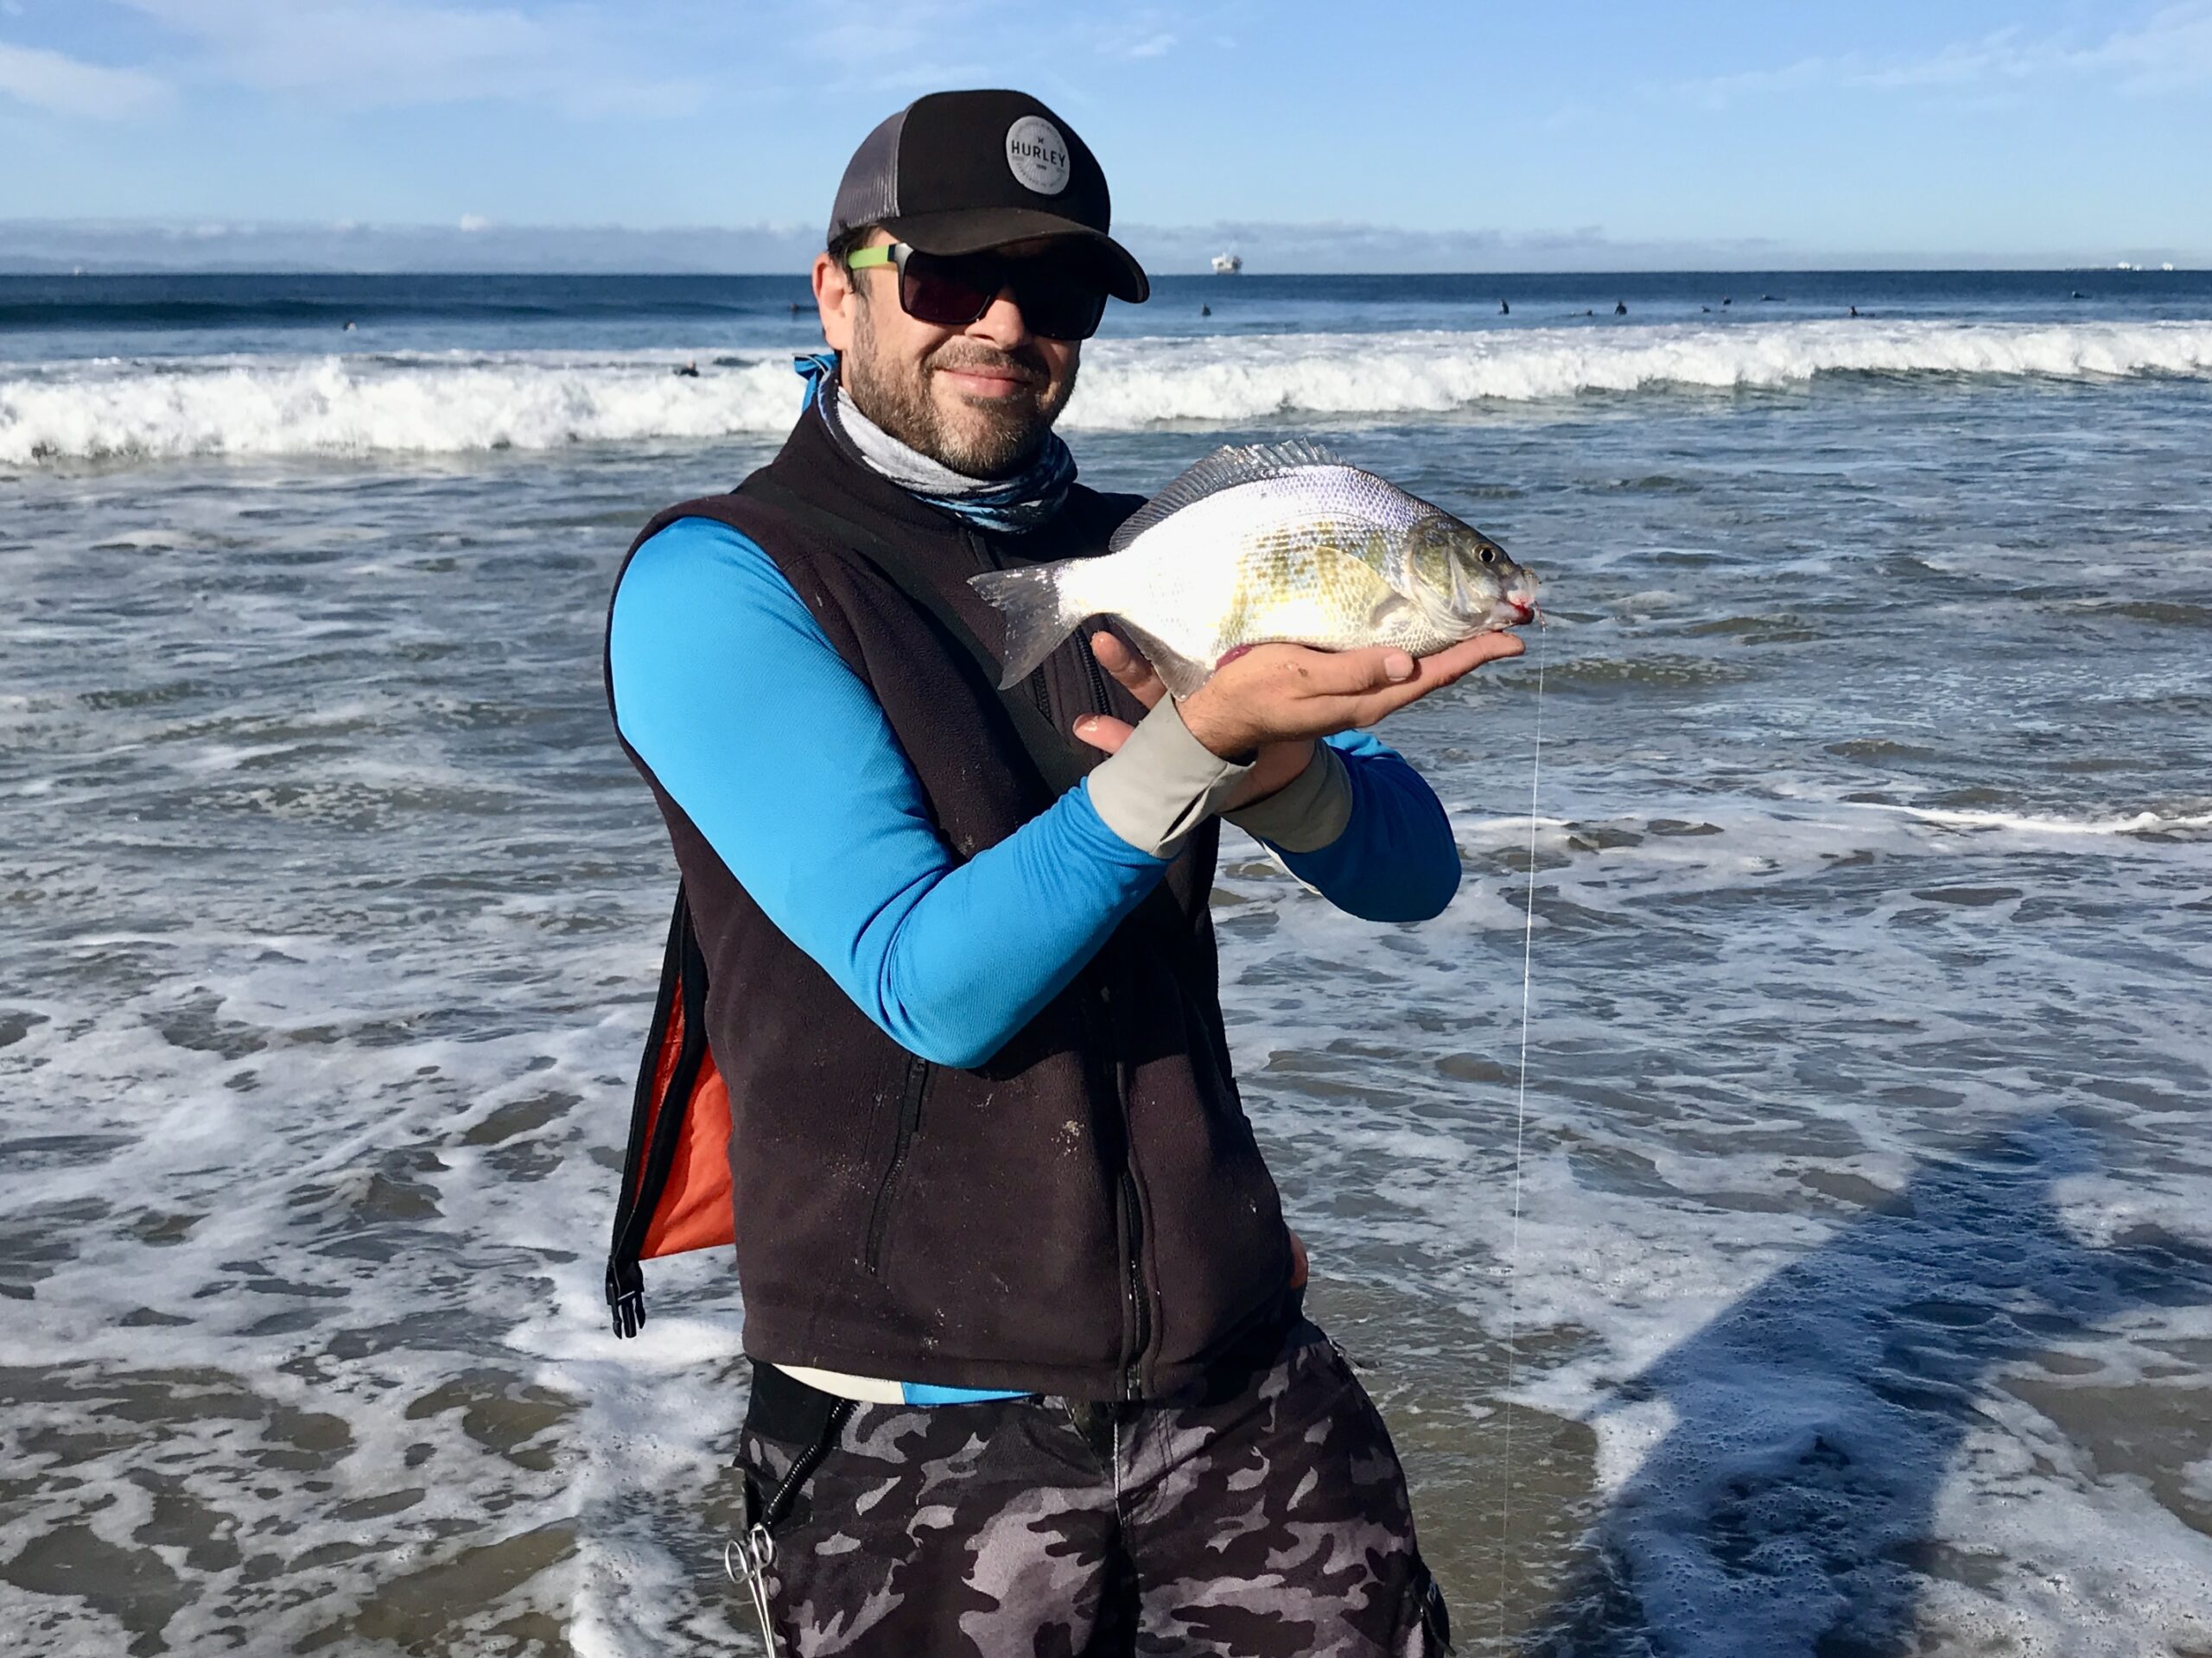 How To Keep Fish On The Beach - Surf Fishing Coolers And Other Options